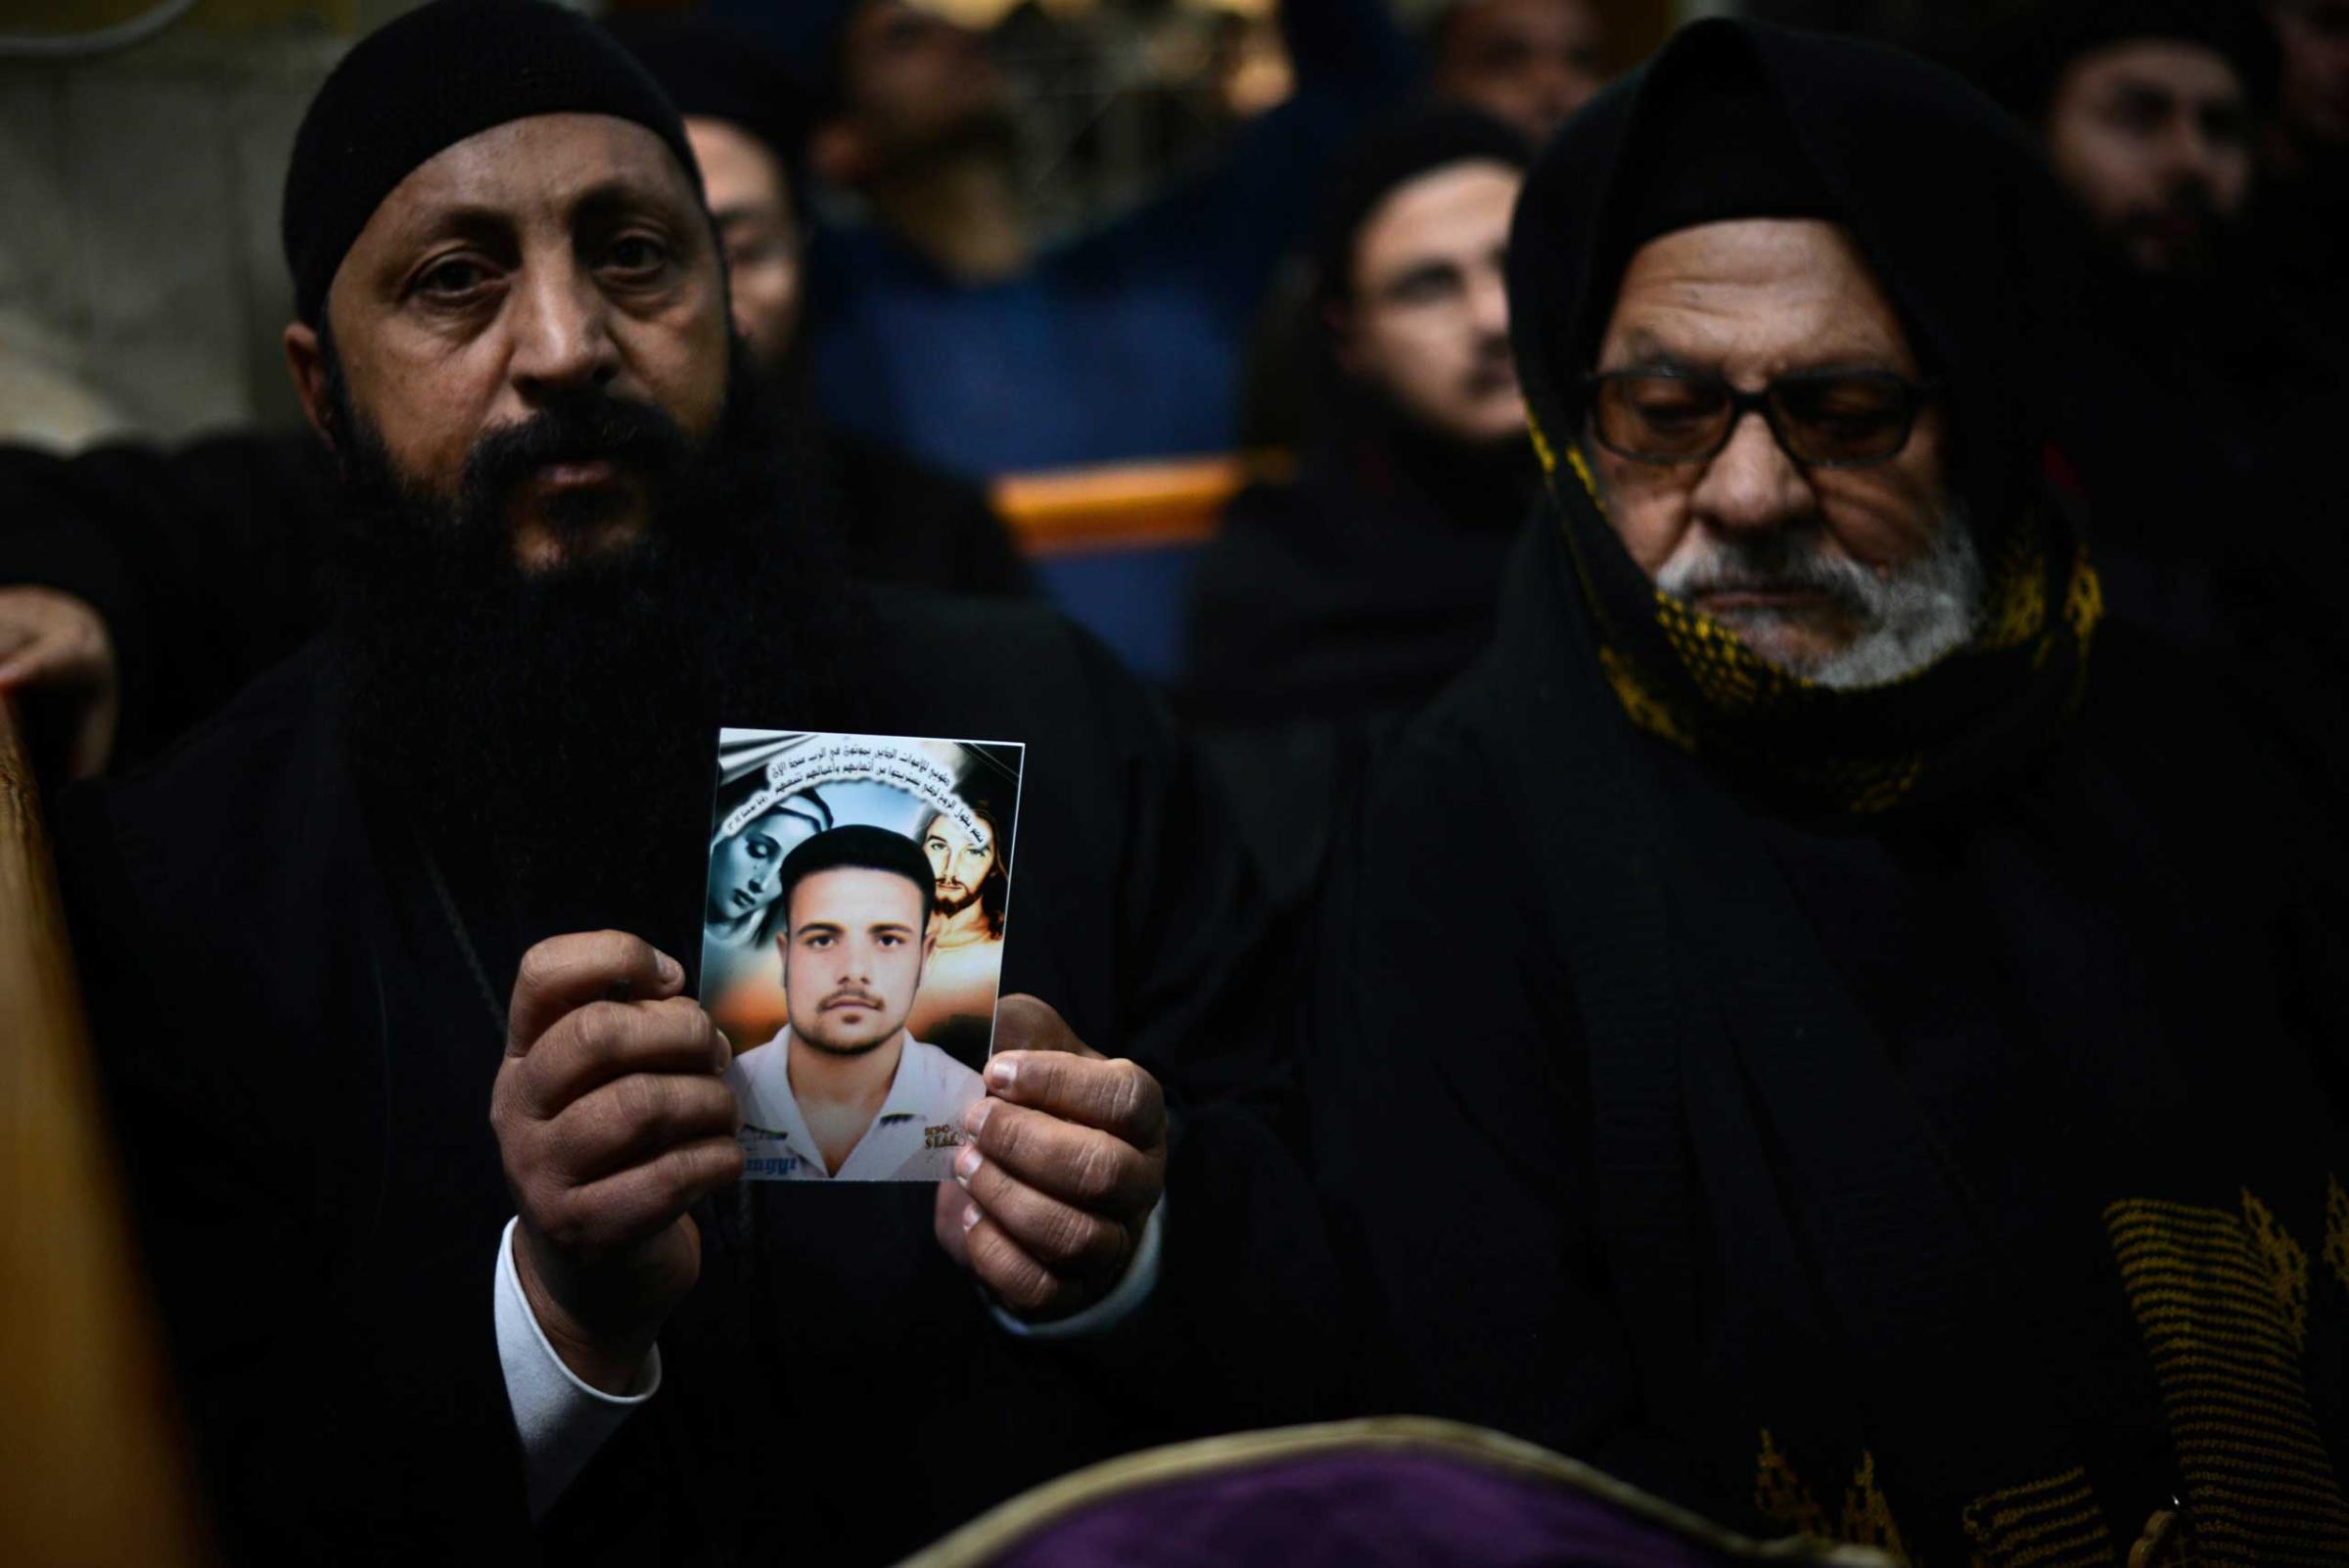 A Coptic clergyman shows a picture of a man whom he says is one of the Egyptian Coptic Christians purportedly murdered by ISIS group militants in Libya, on Feb. 16, 2015, during a memorial ceremony in the village of al-Awar in Egypt's southern province of Minya.